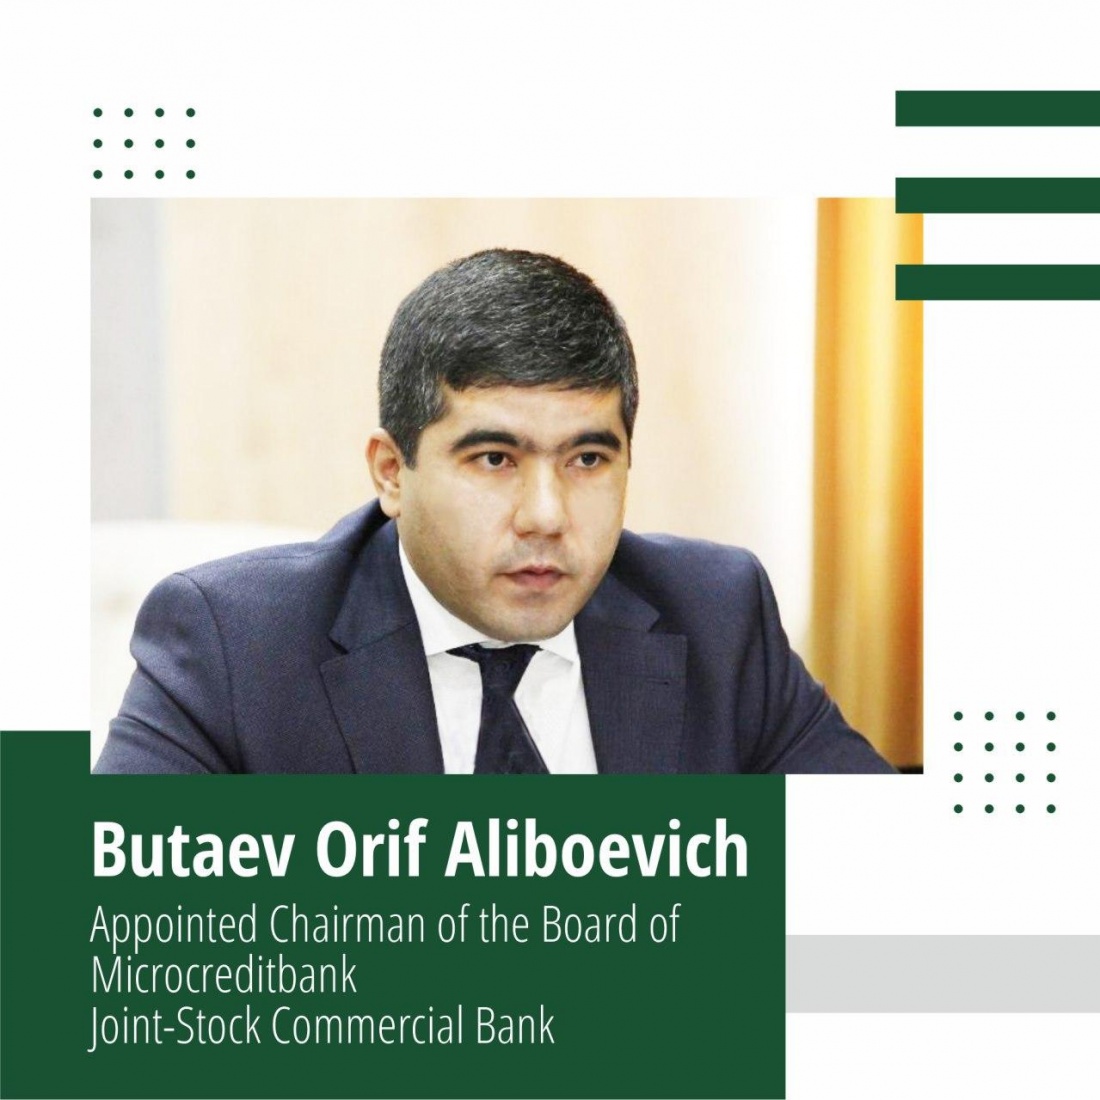 Butaev Orif Aliboevich Appointed Chairman of the Board of Microcreditbank Joint-Stock Commercial Bank